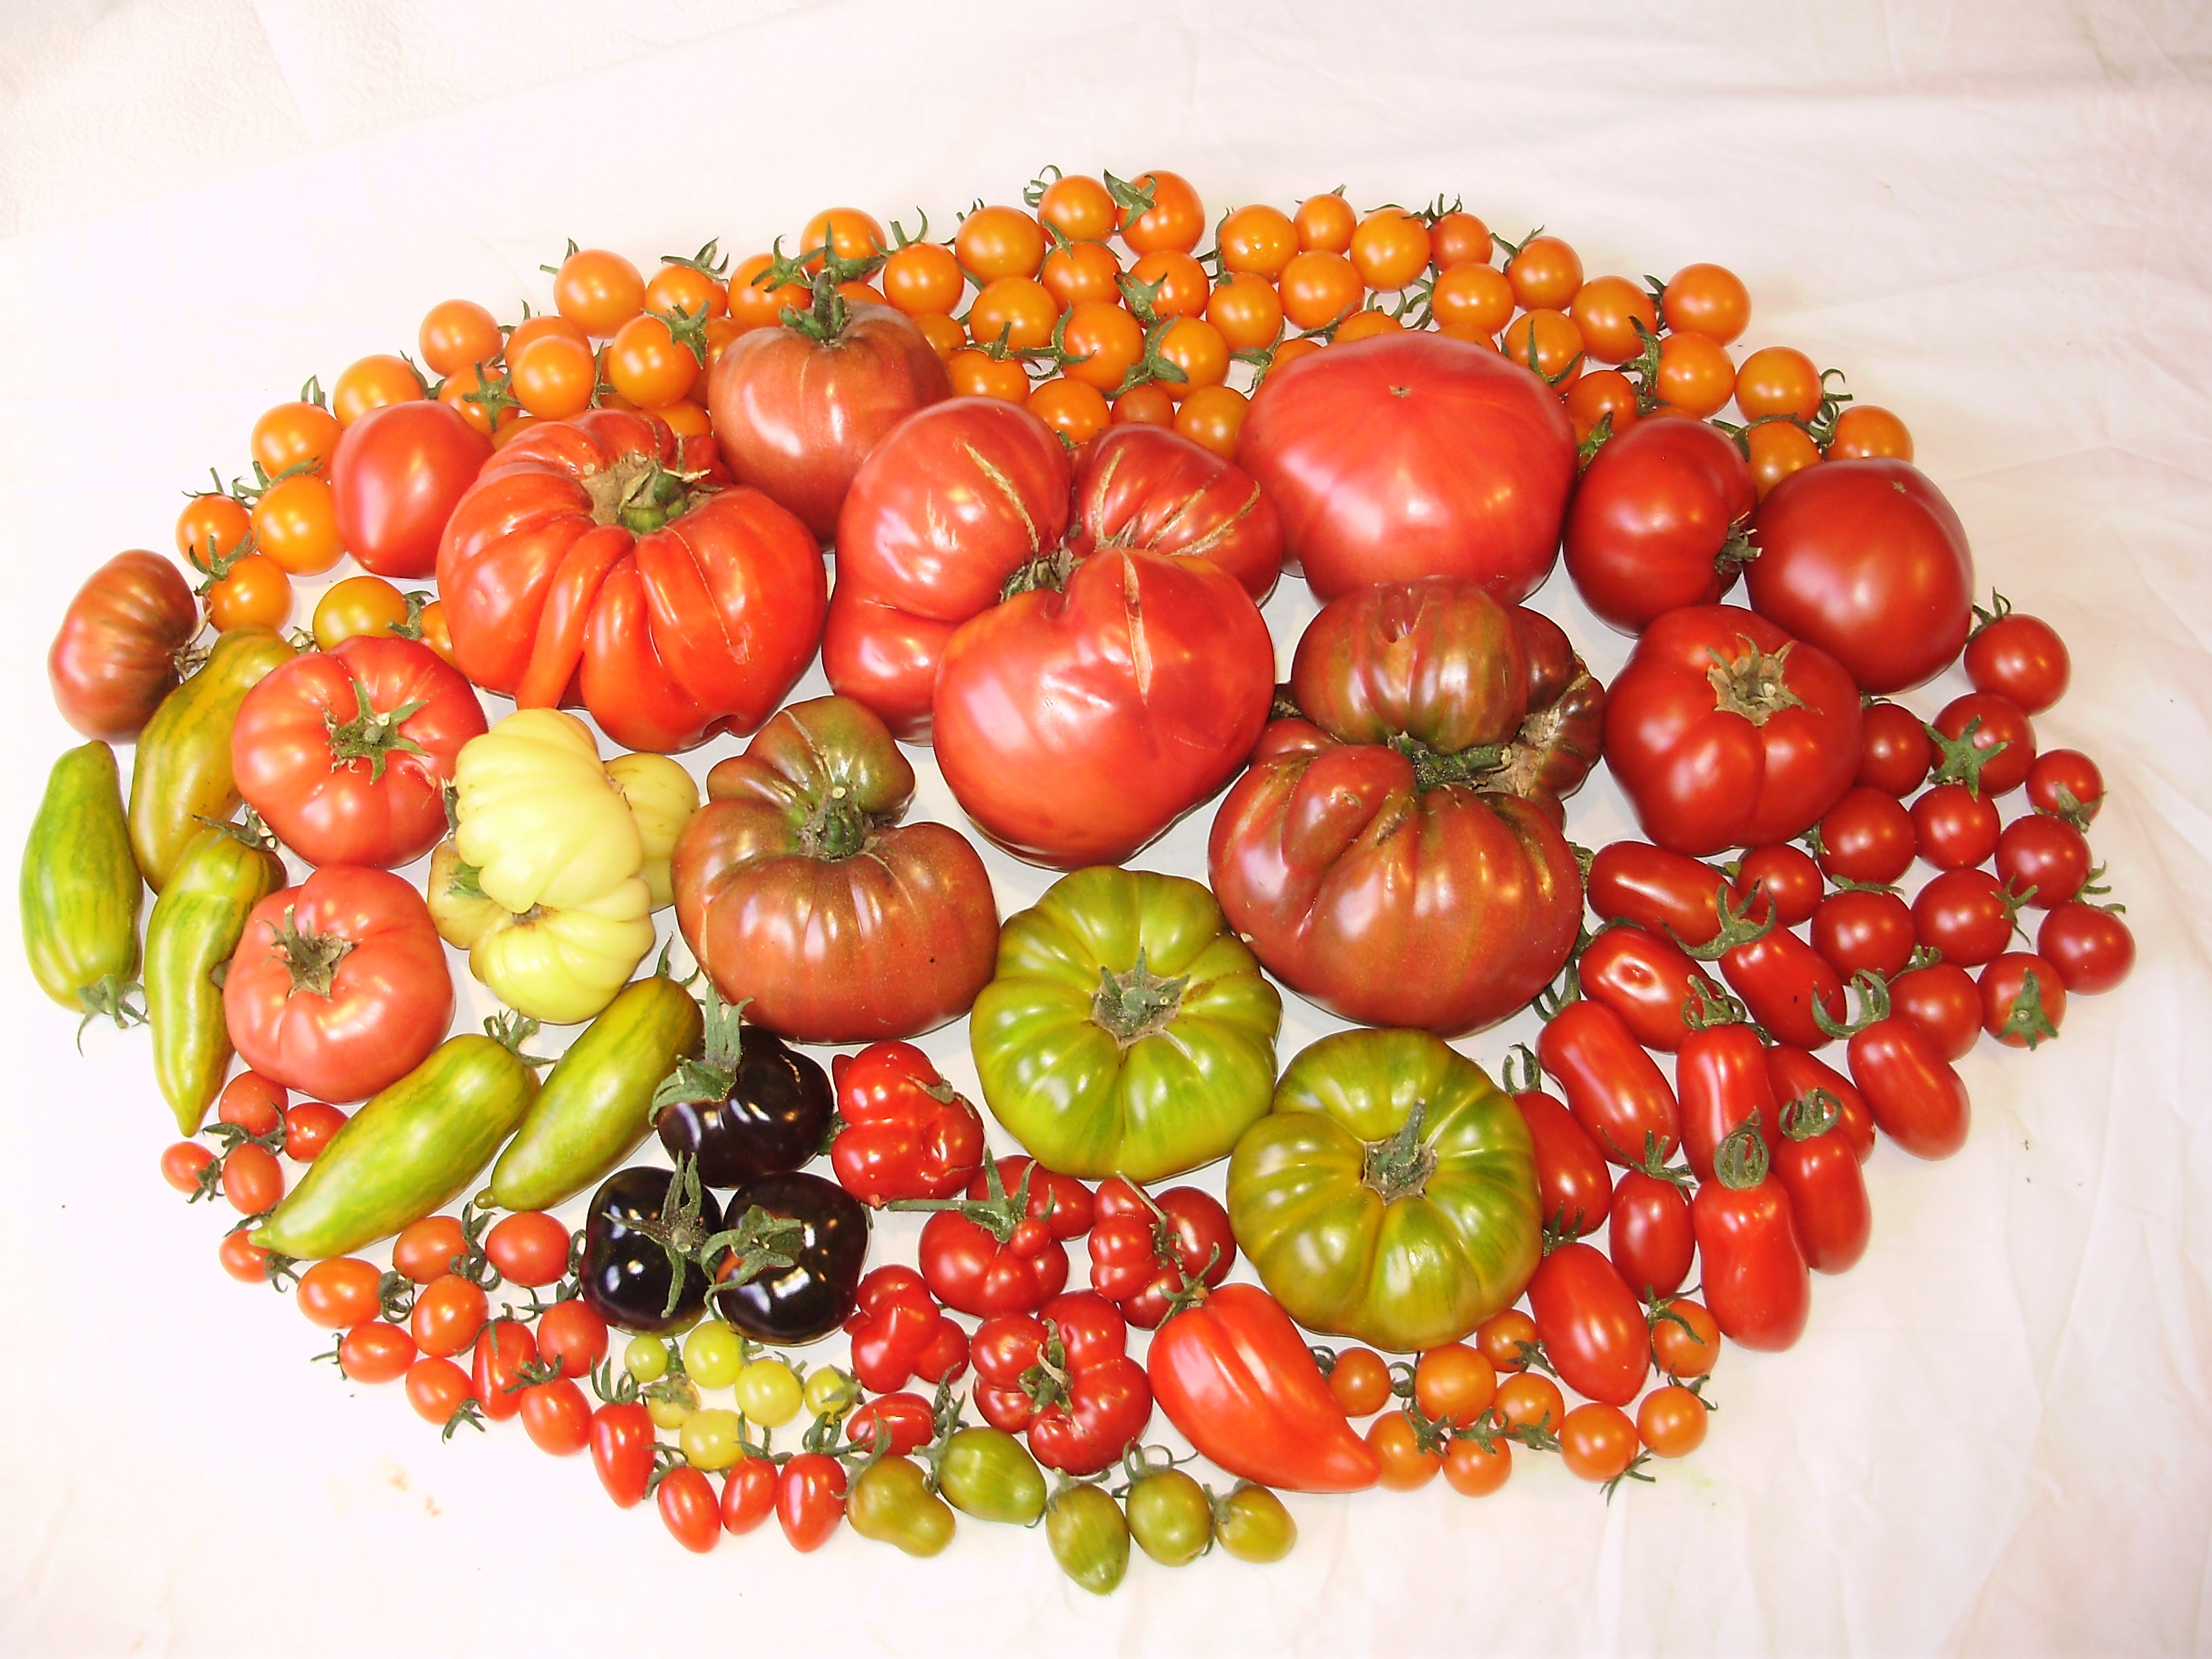 A selection of the 47 fantastically diverse varieties of tomatoes  I grew for the first 'Totally Terrific Tomato Festival' in 2012 - a feast for the eyes.